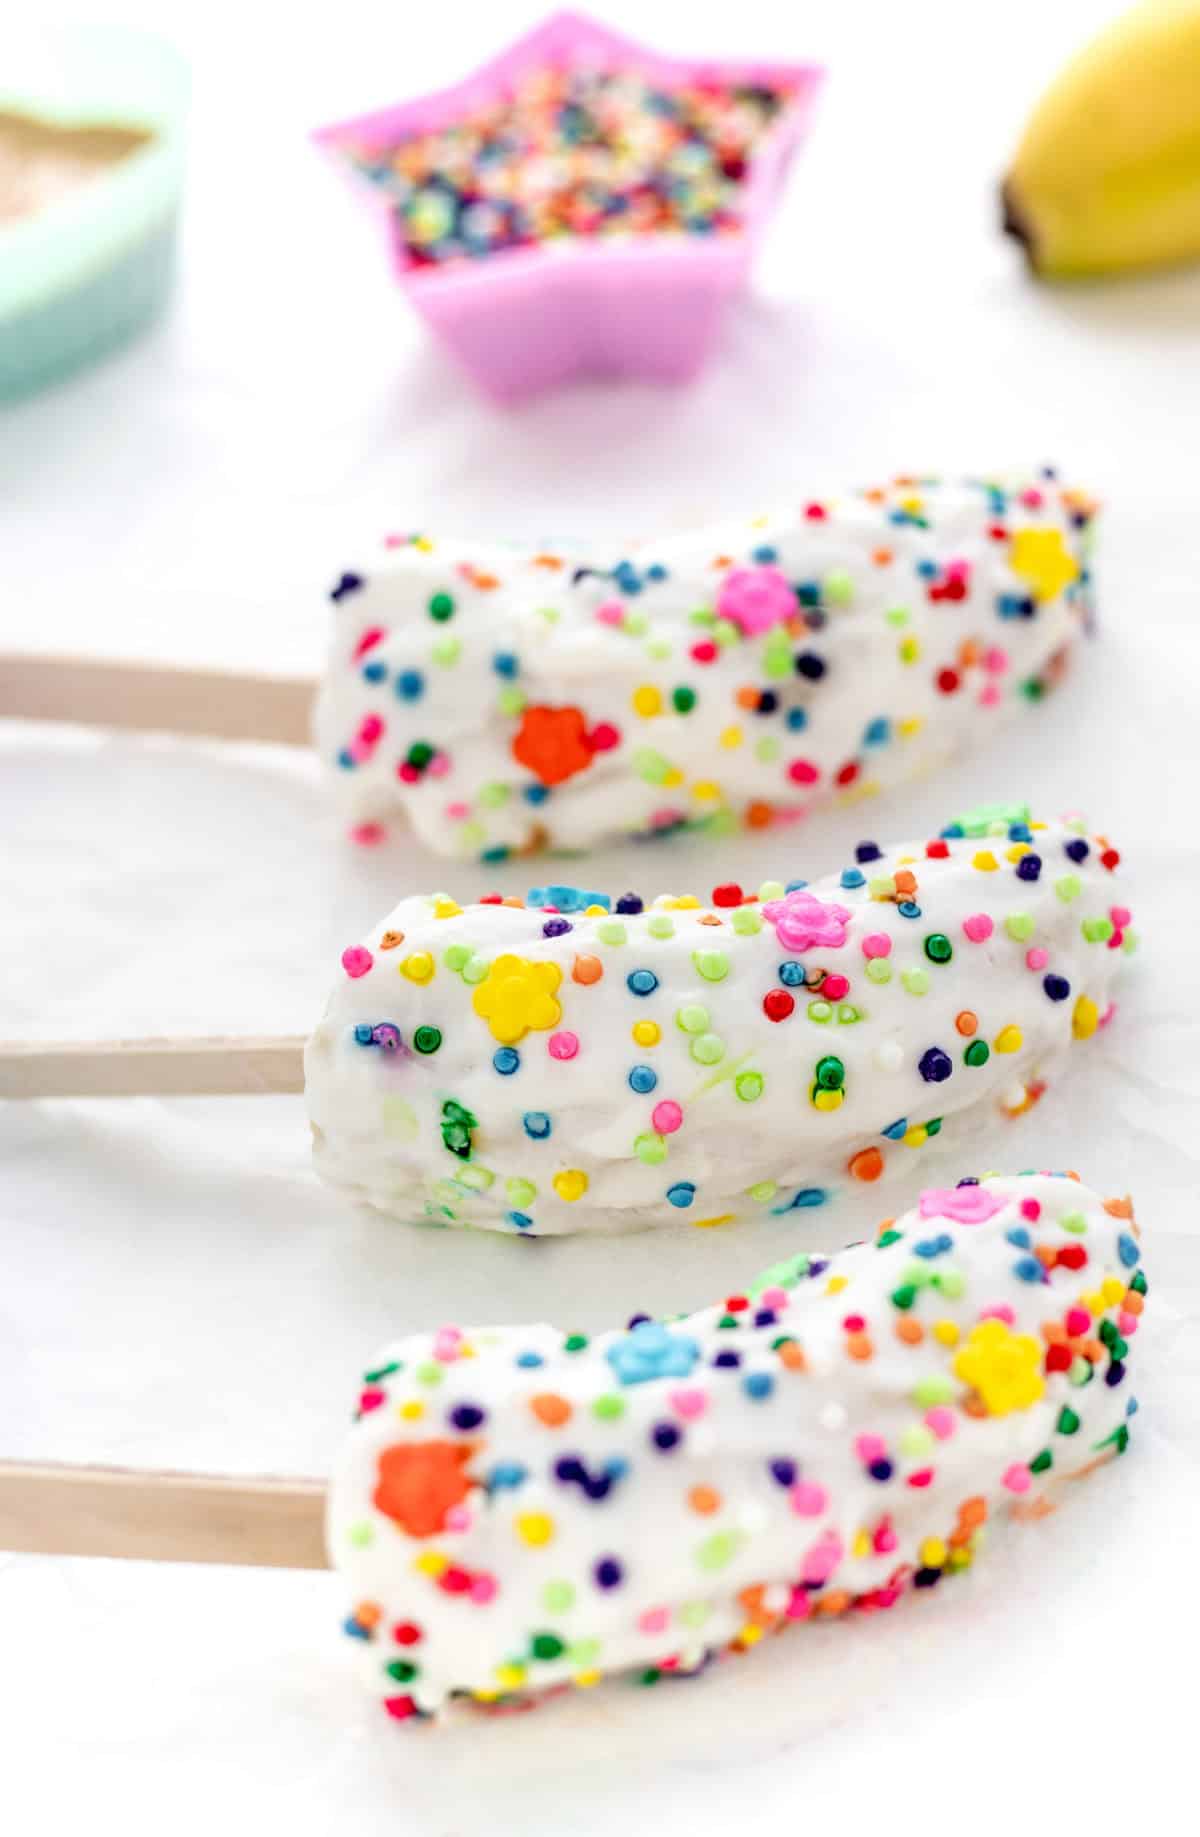 3 frozen banana pops with yogurt, decorated in colorful sprinkles, on a baking sheet.